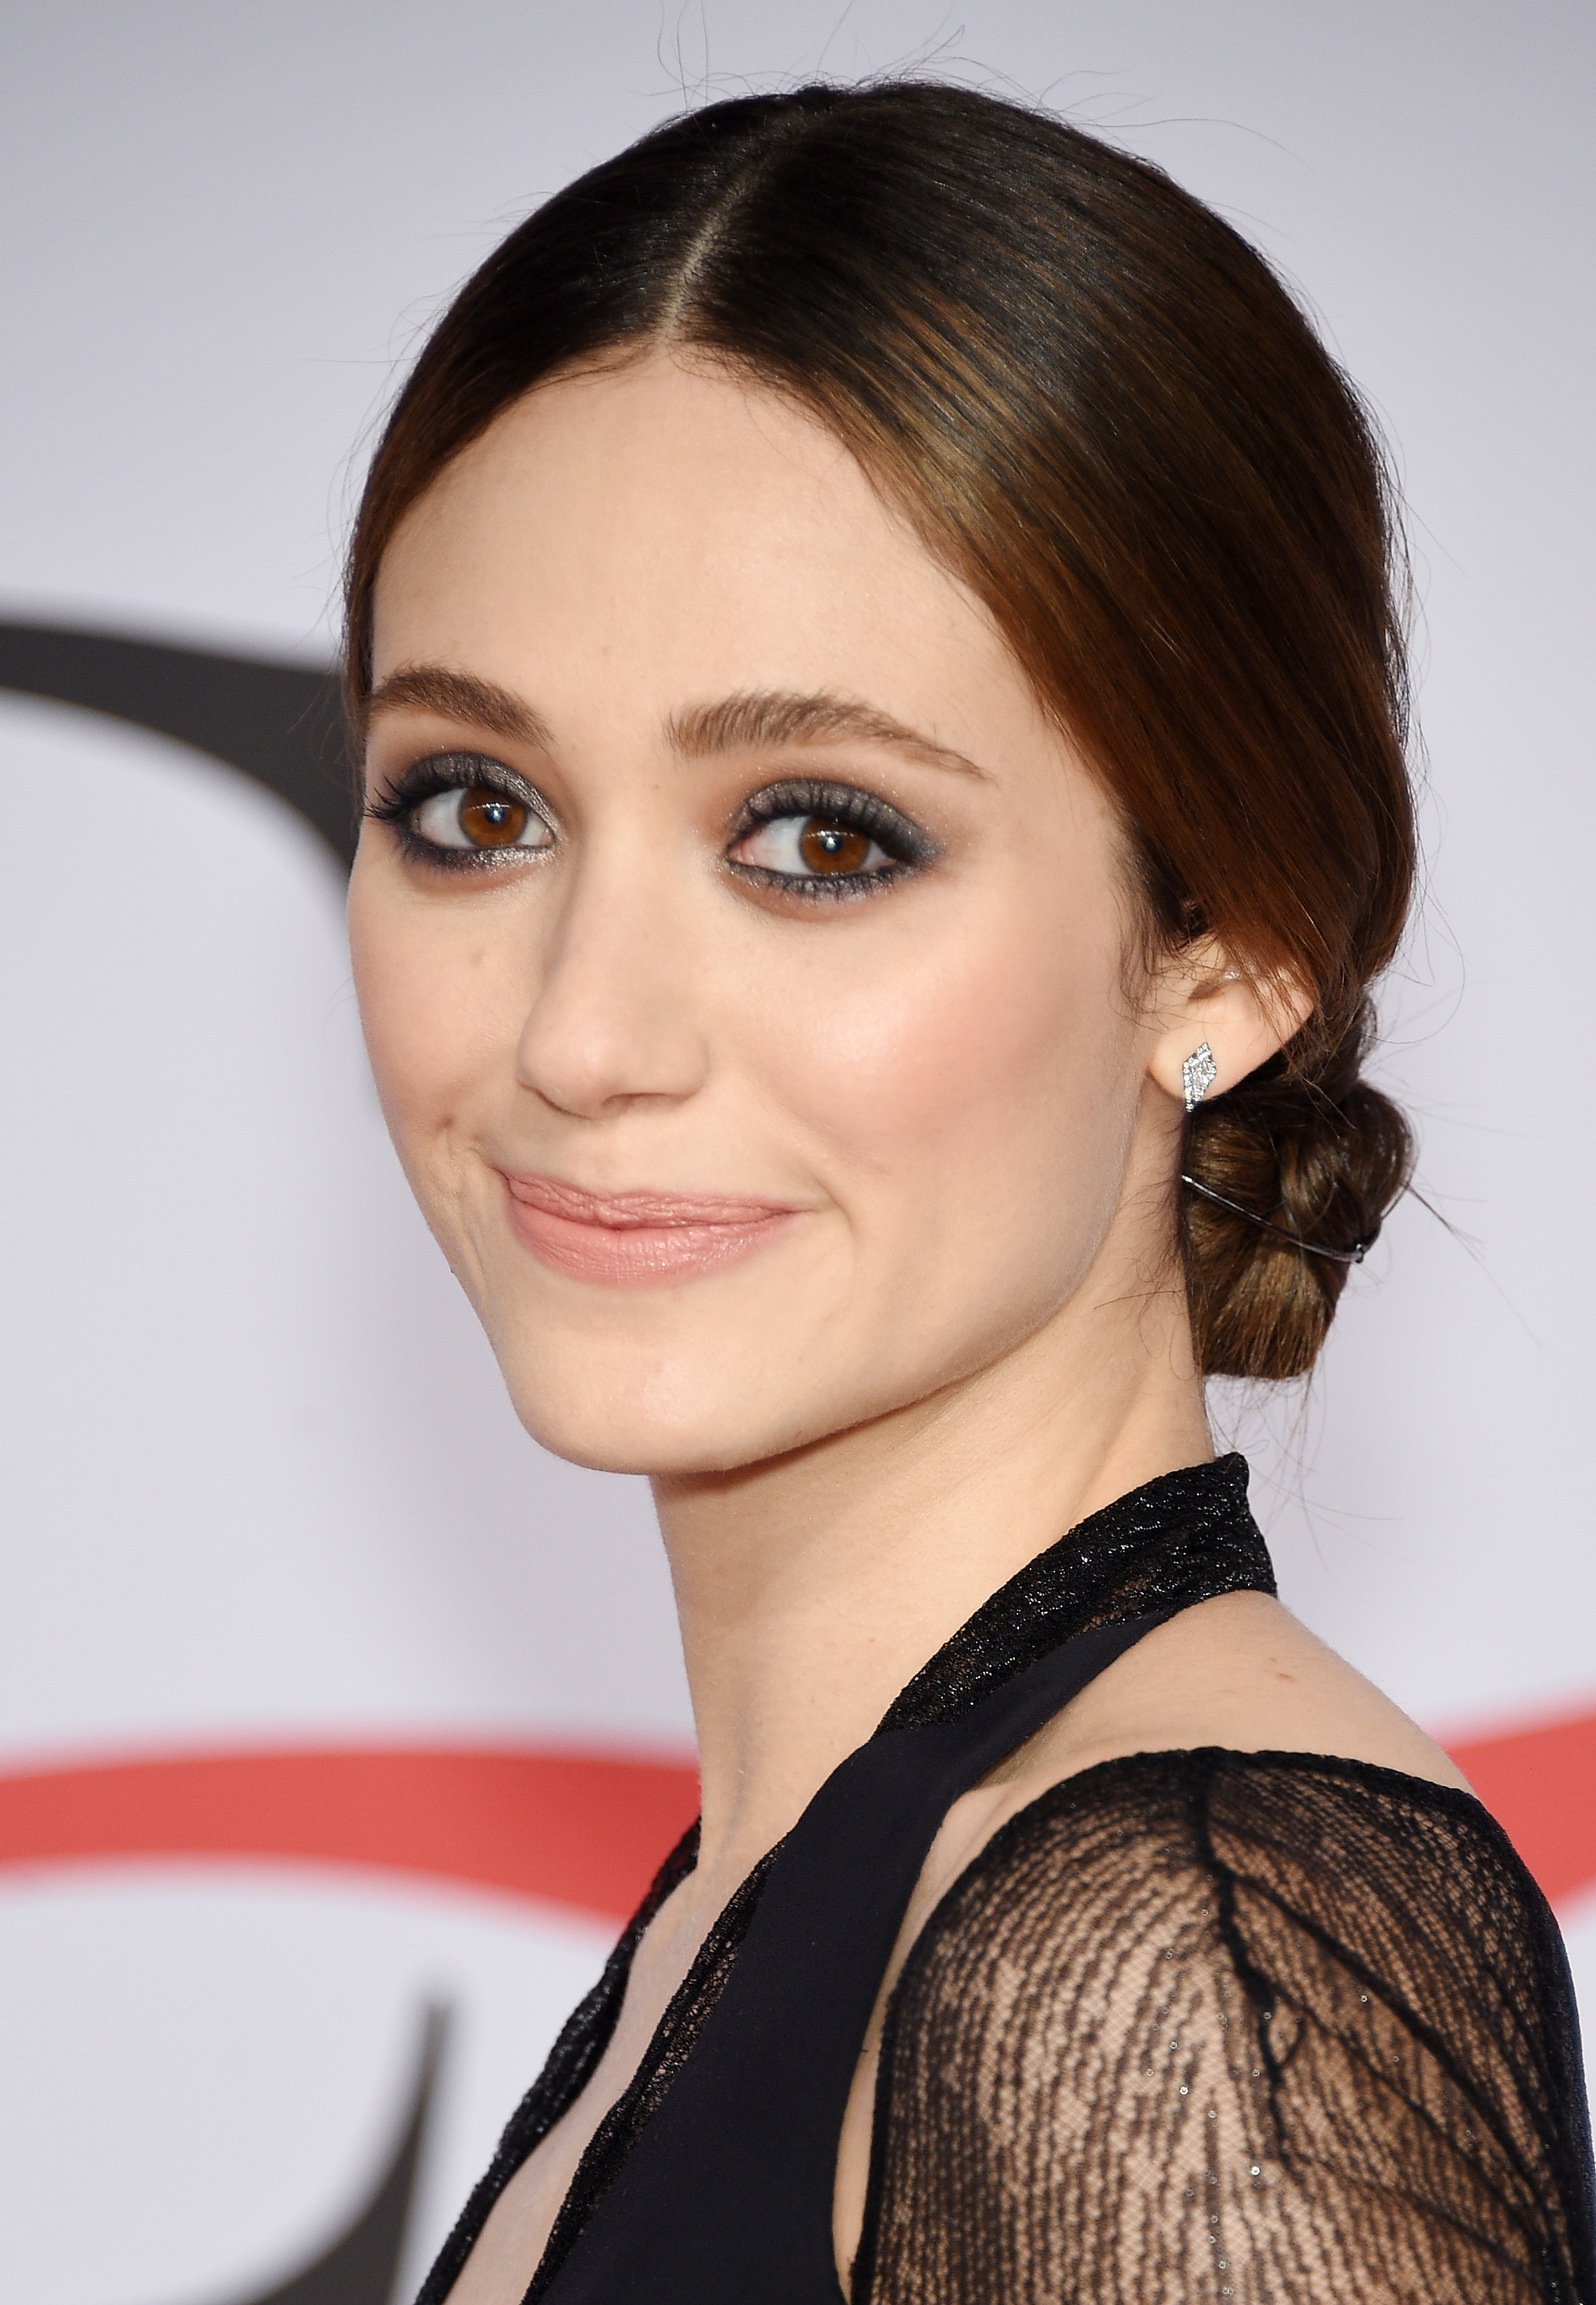 Emmy Rossum At The 2015 Cfda Awards Pulls Off Vampire Chic Perfectly 